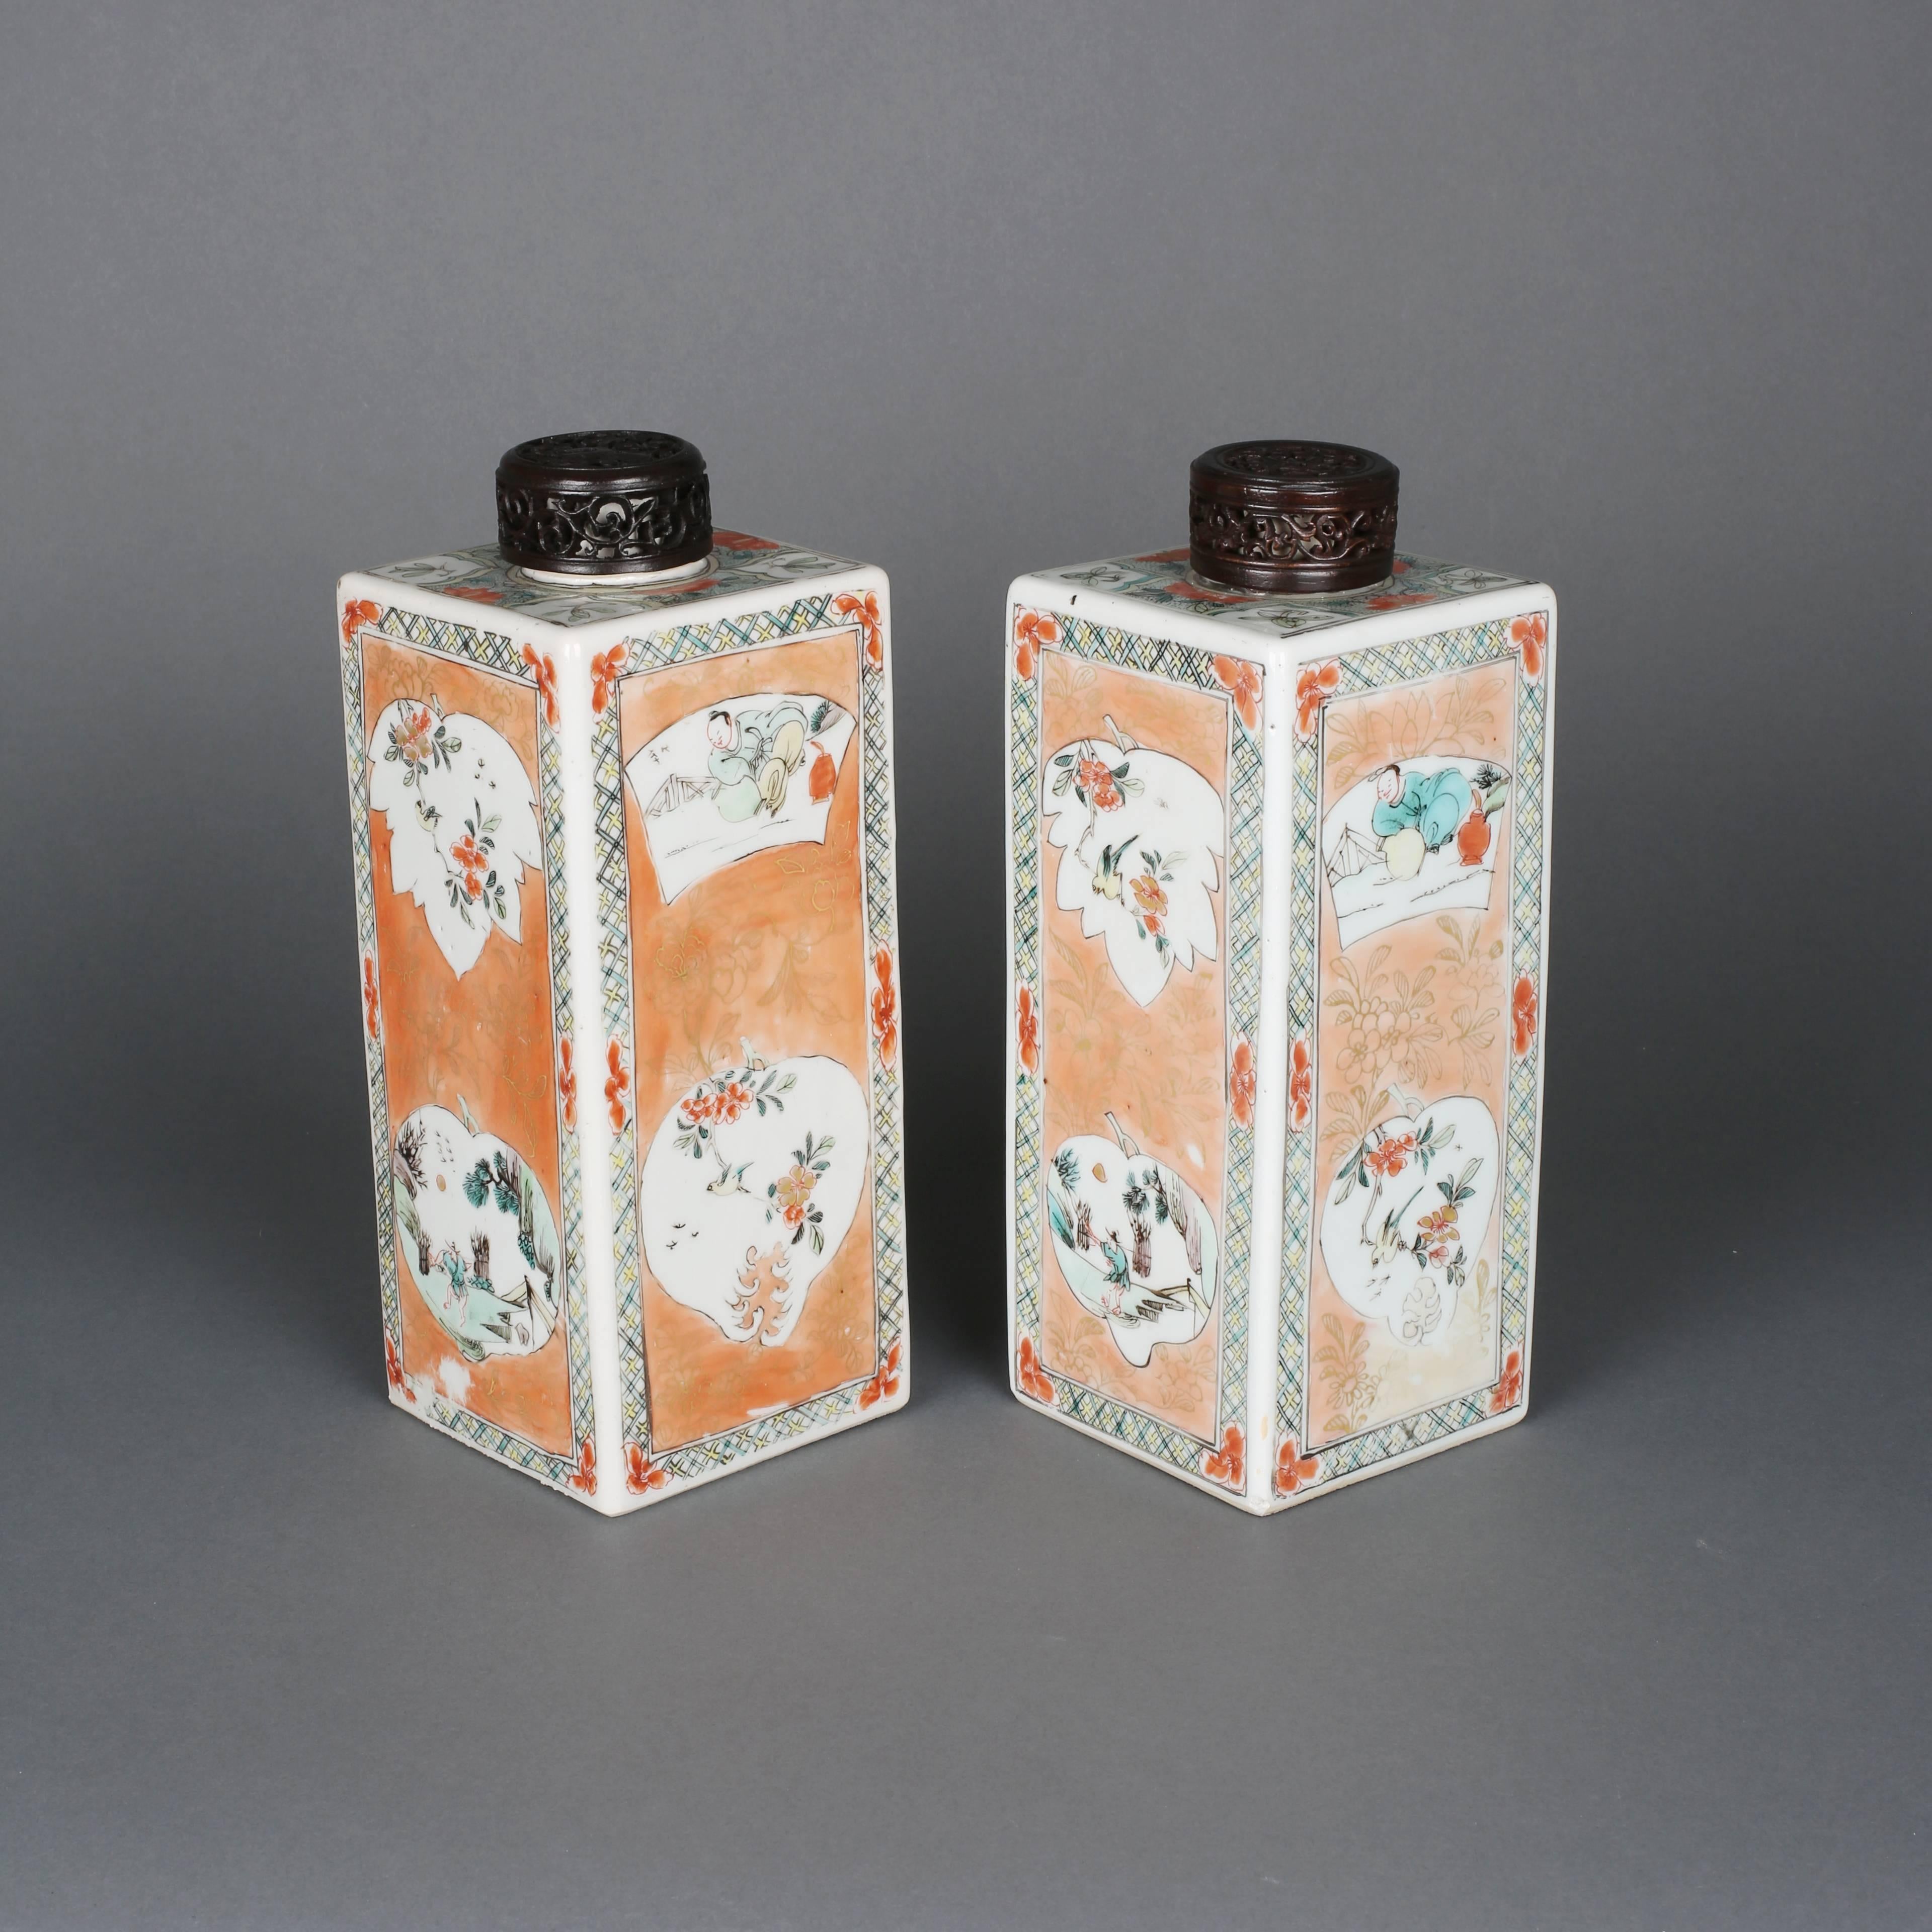 A pair of Chinese porcelain famille verte square tea caddies, painted on the four sides with panels of leaf, scroll, gourd and fruit shapes enclosing scenes of birds and figures, with a continuous border of keyfret divided by six flower heads on the